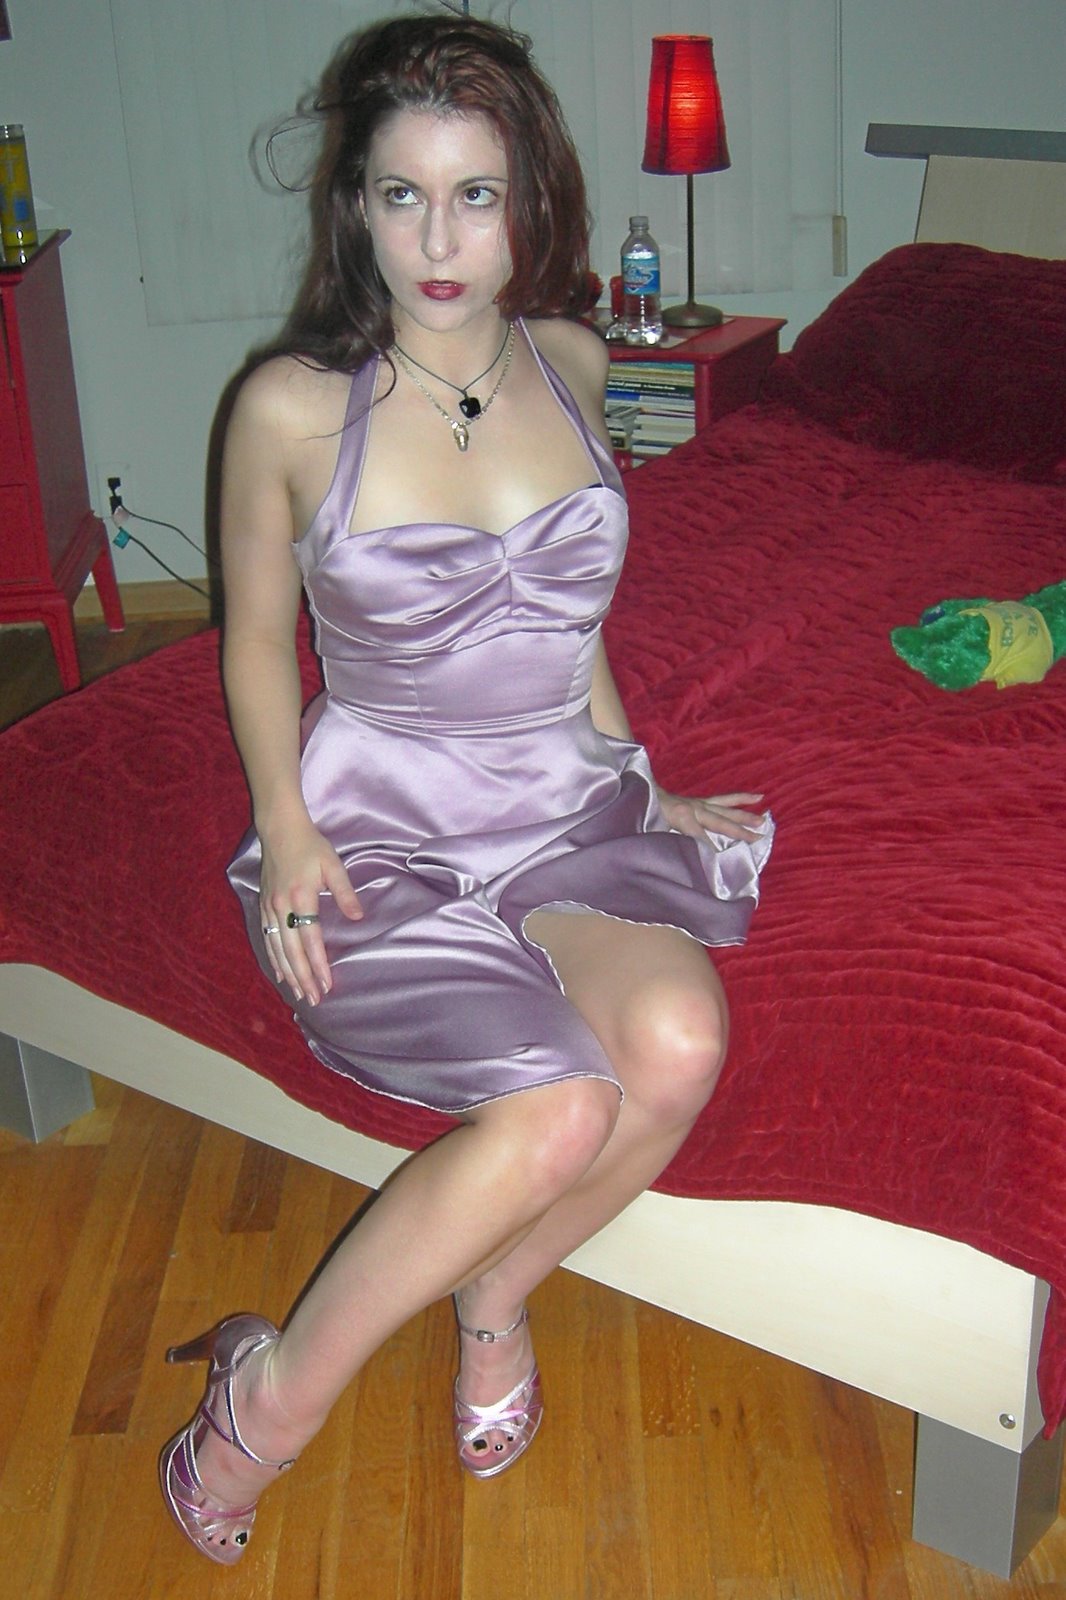 [Michelle+Brooks+Lilac+Dress+on+Red+Bed.jpg]